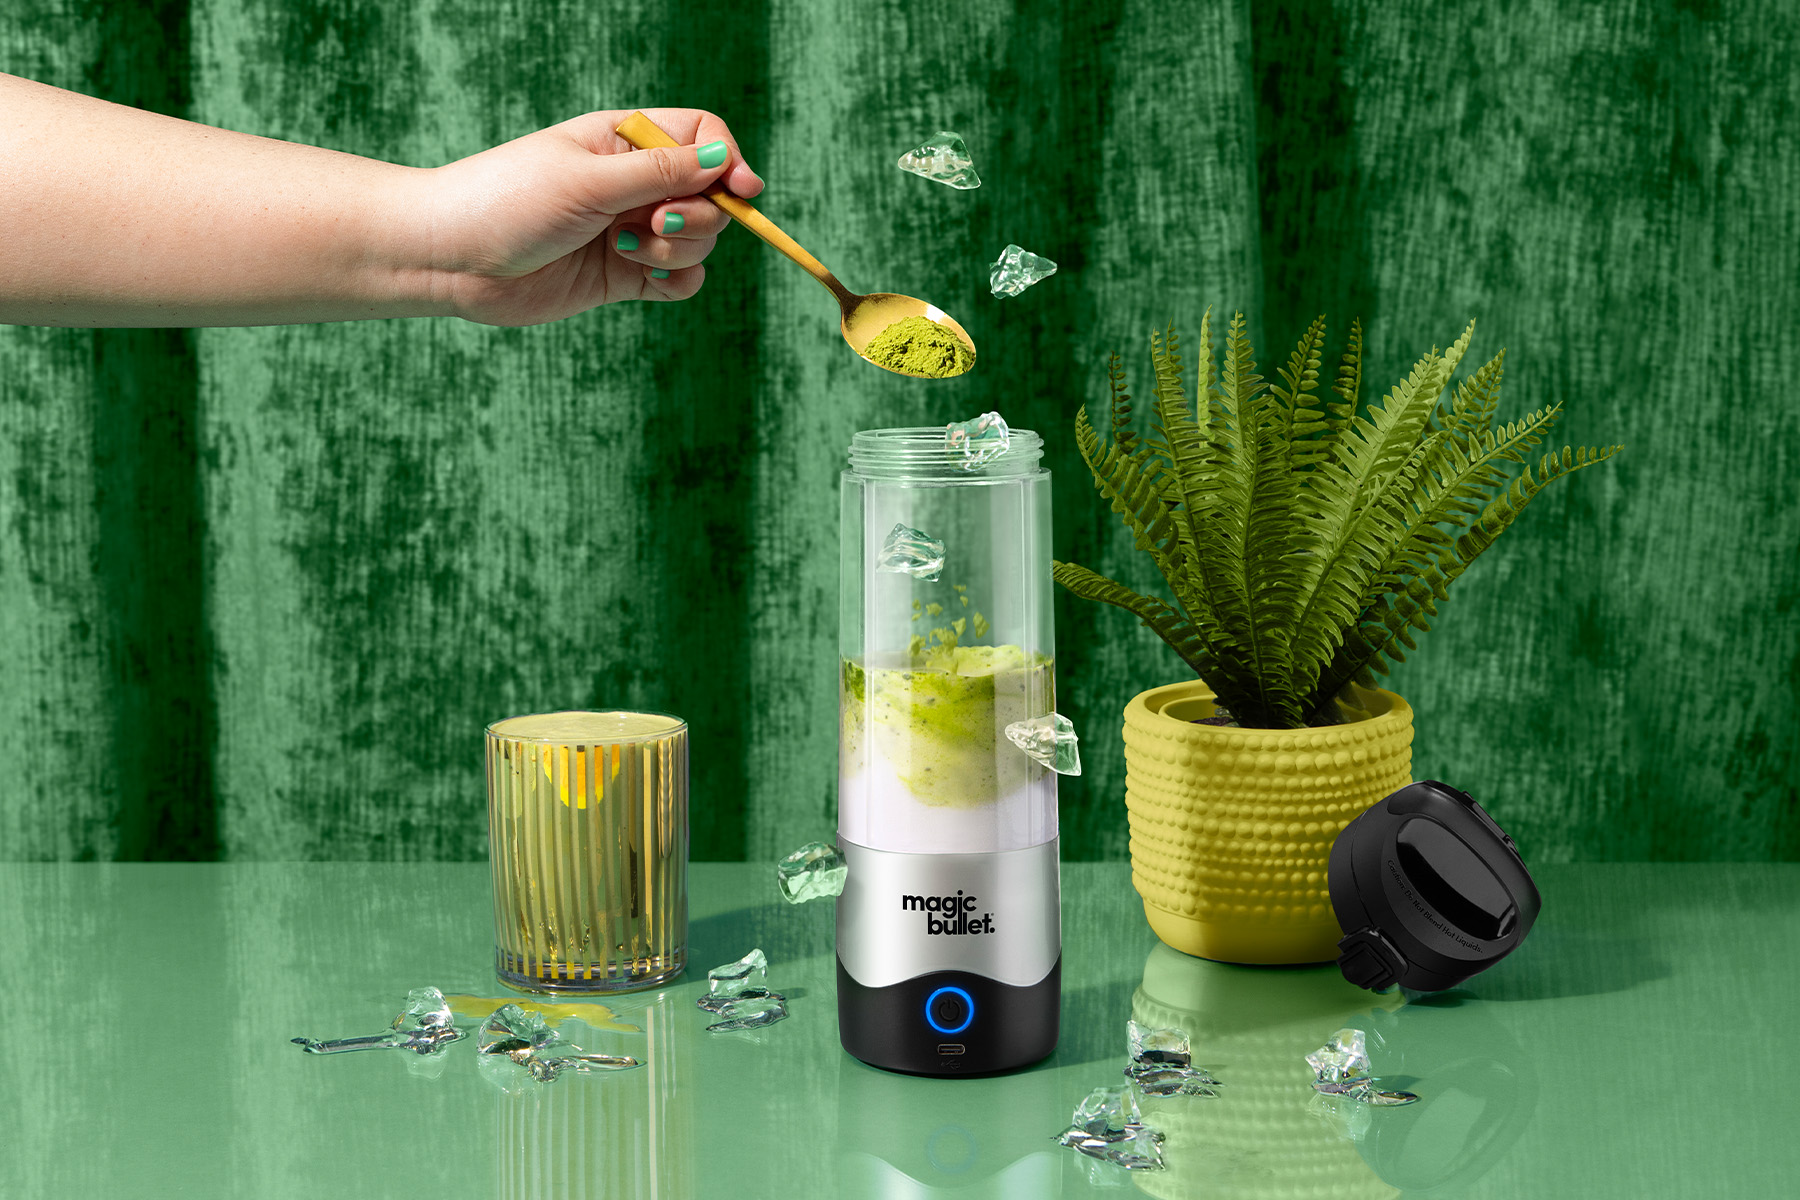 green matcha latte in magic bullet Portable Blender surrounded by ice and decor